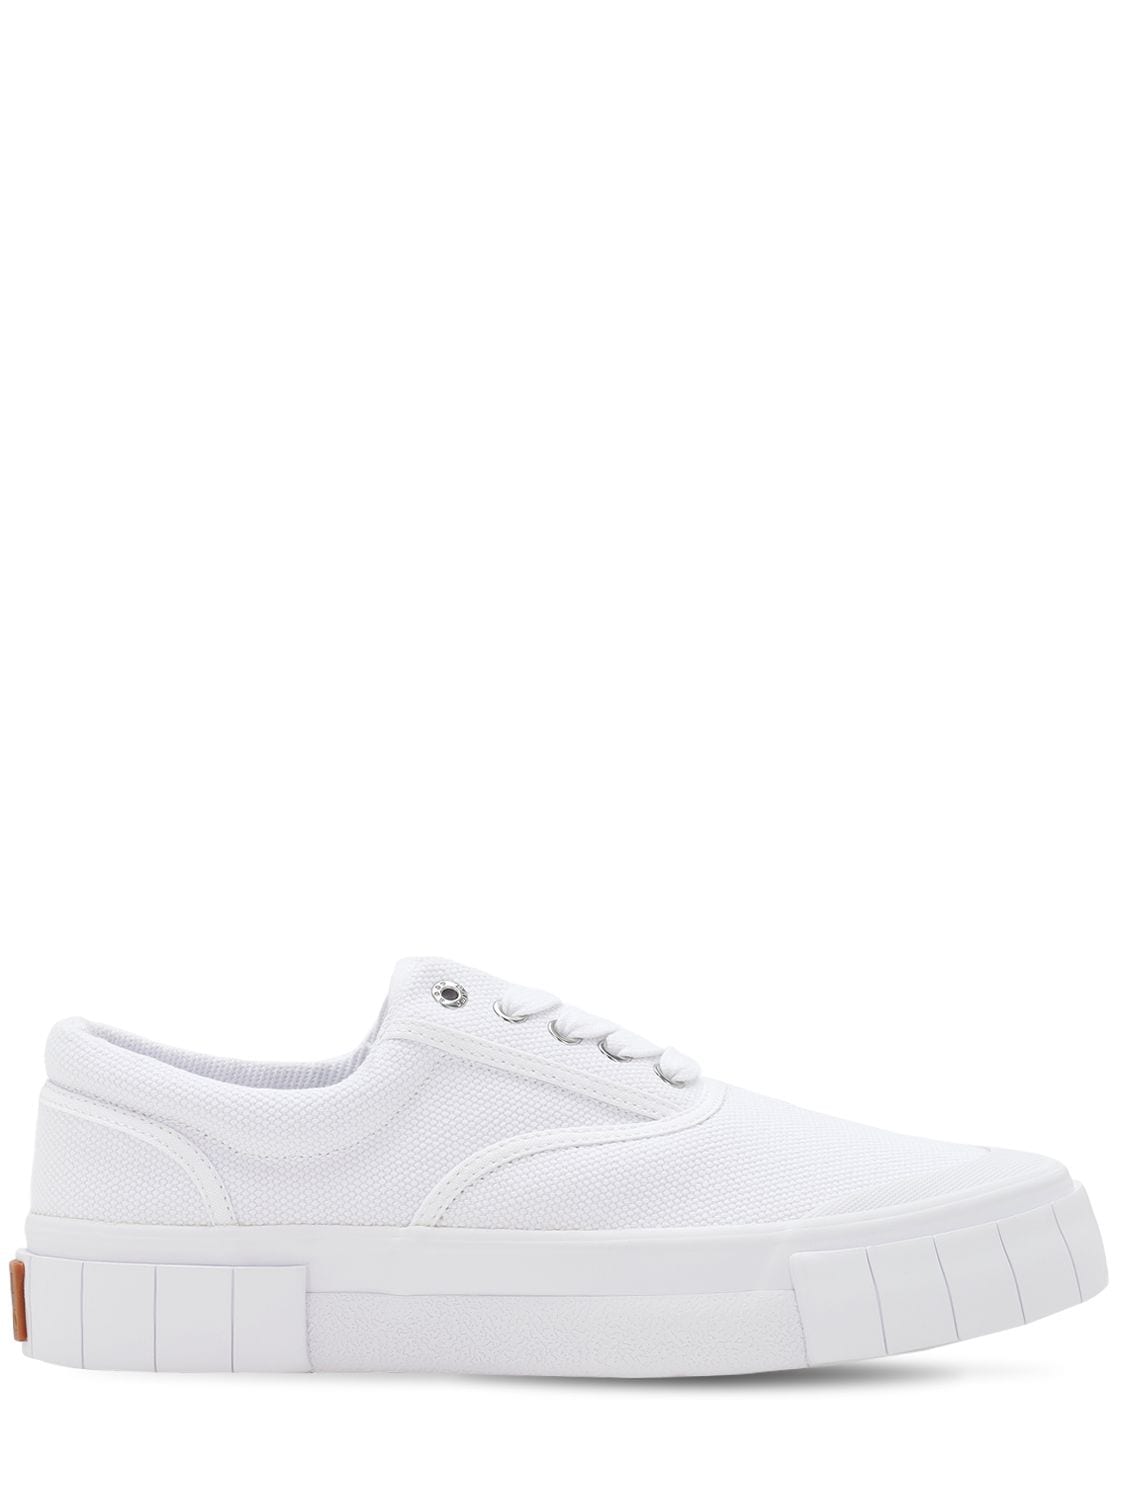 GOOD NEWS Opal Low Top Cotton Sneakers